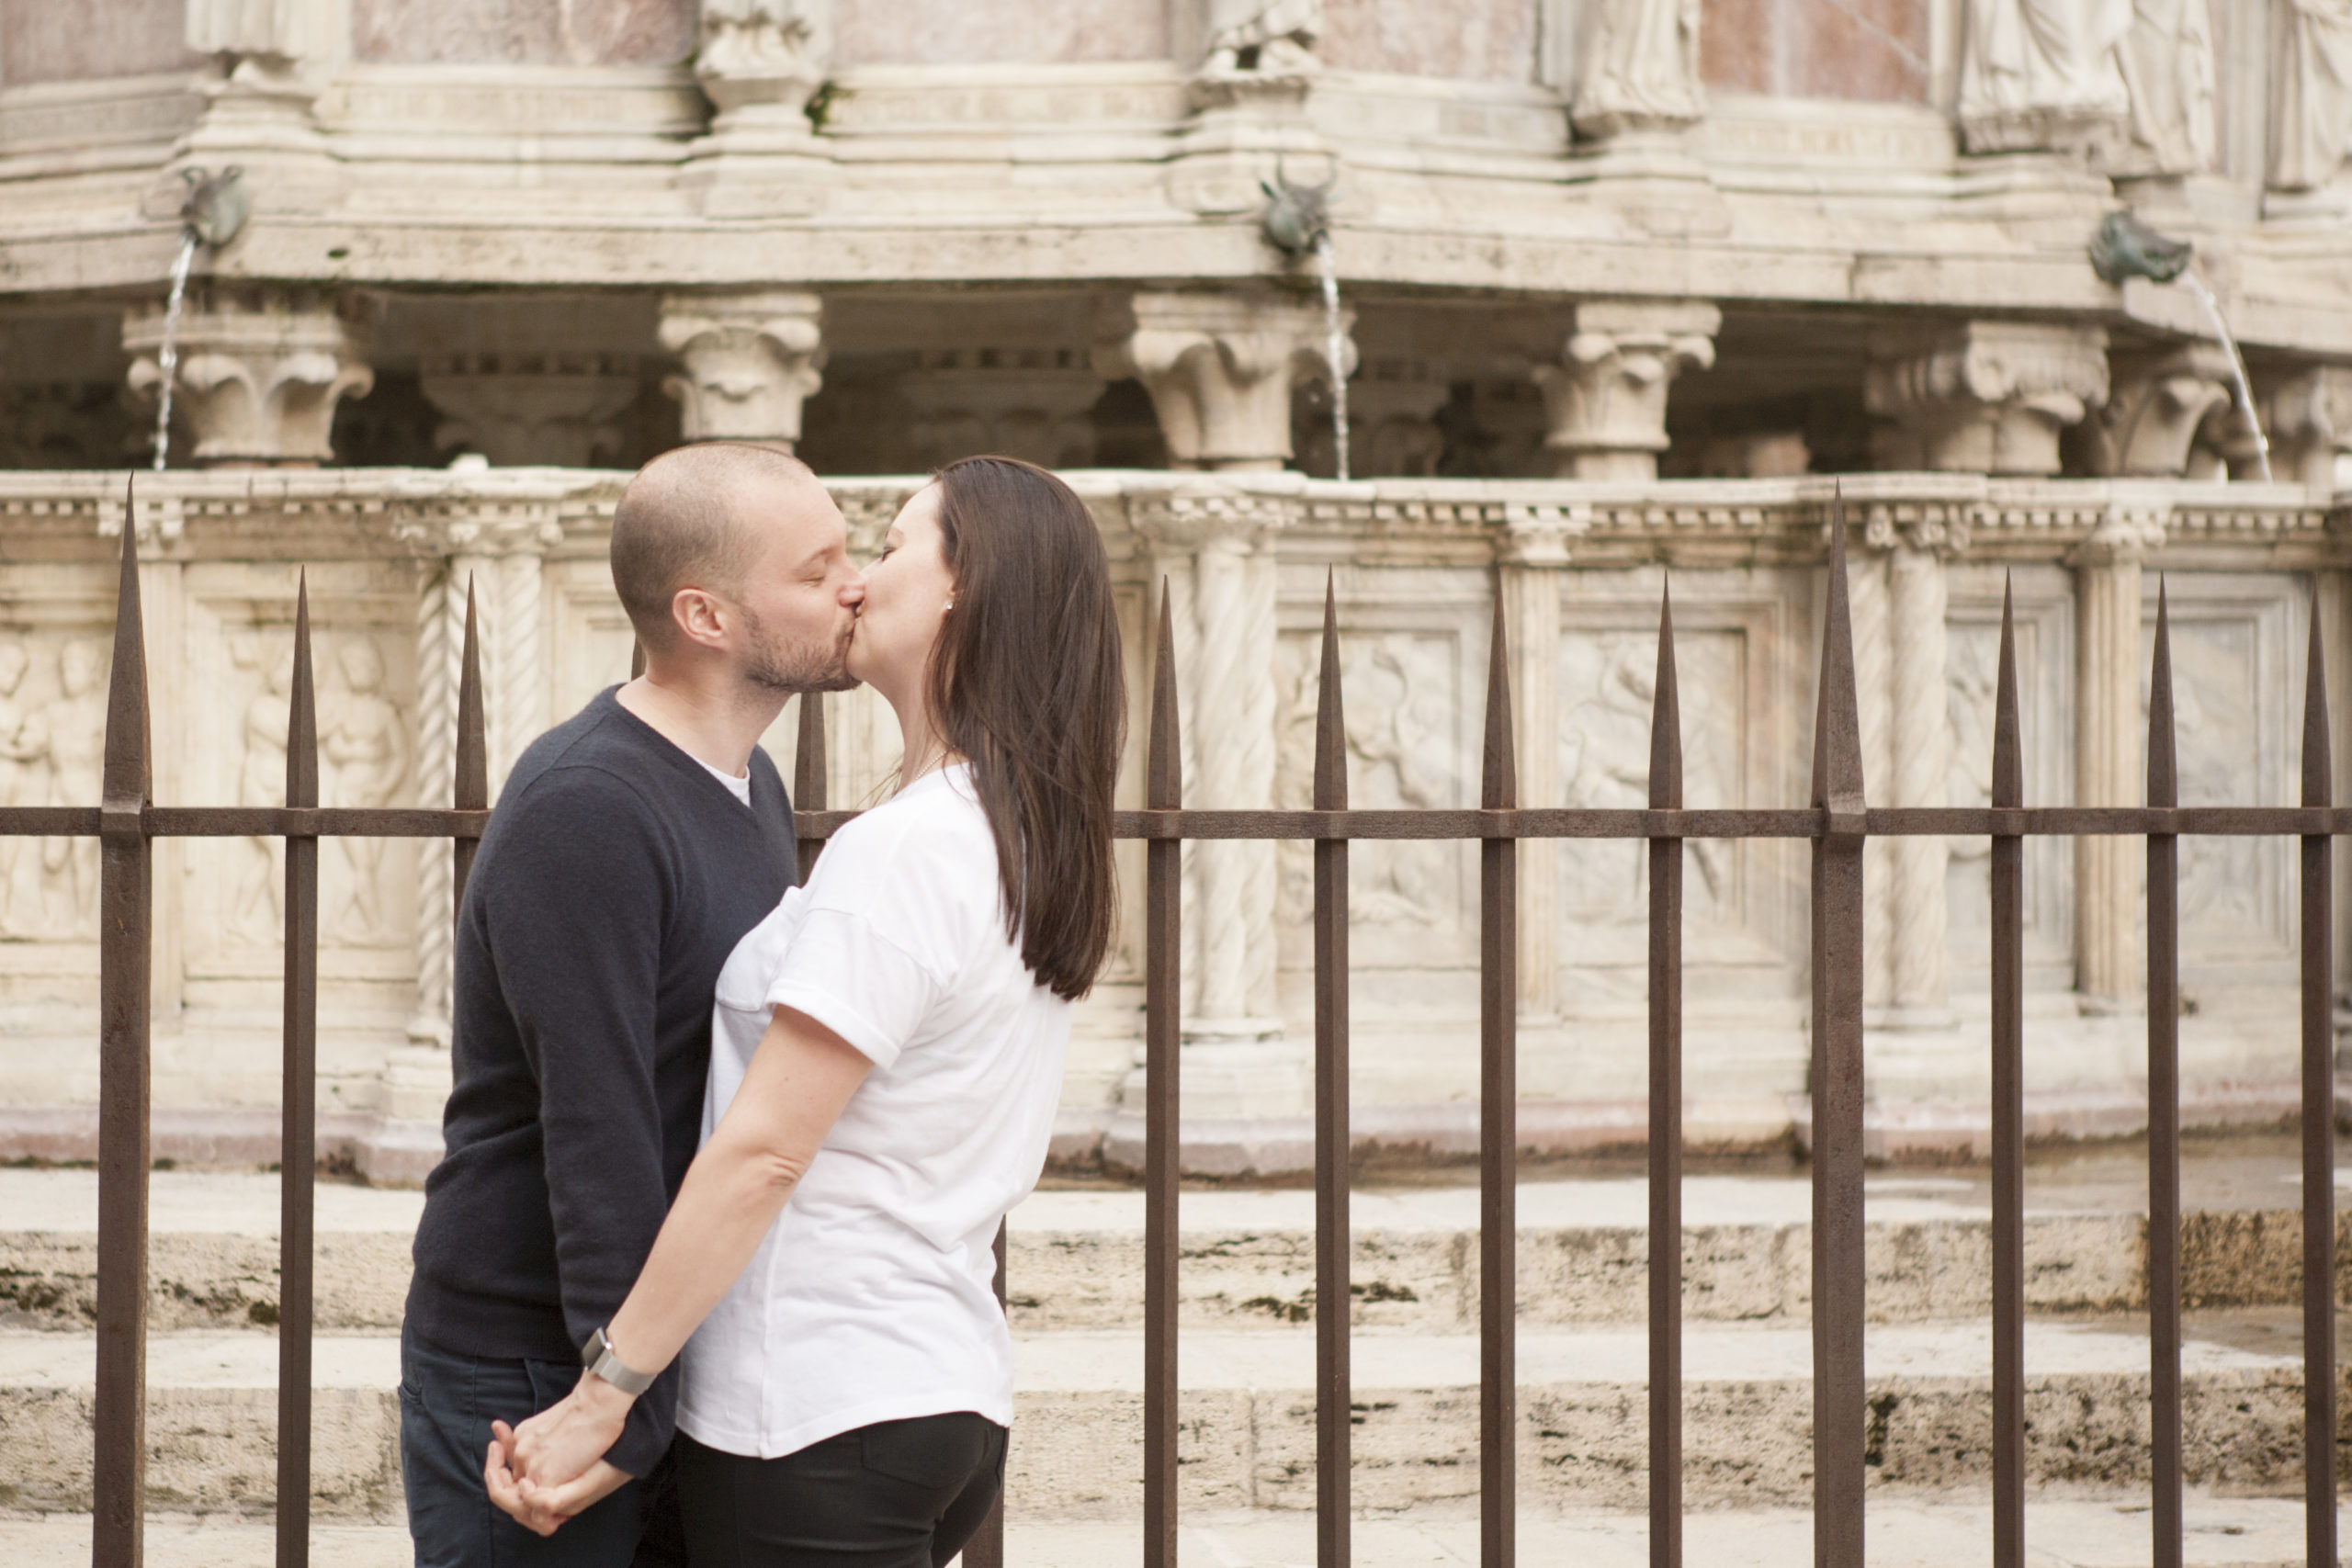 The marriage proposal in Italy - Dream On Wedding planner in Umbria